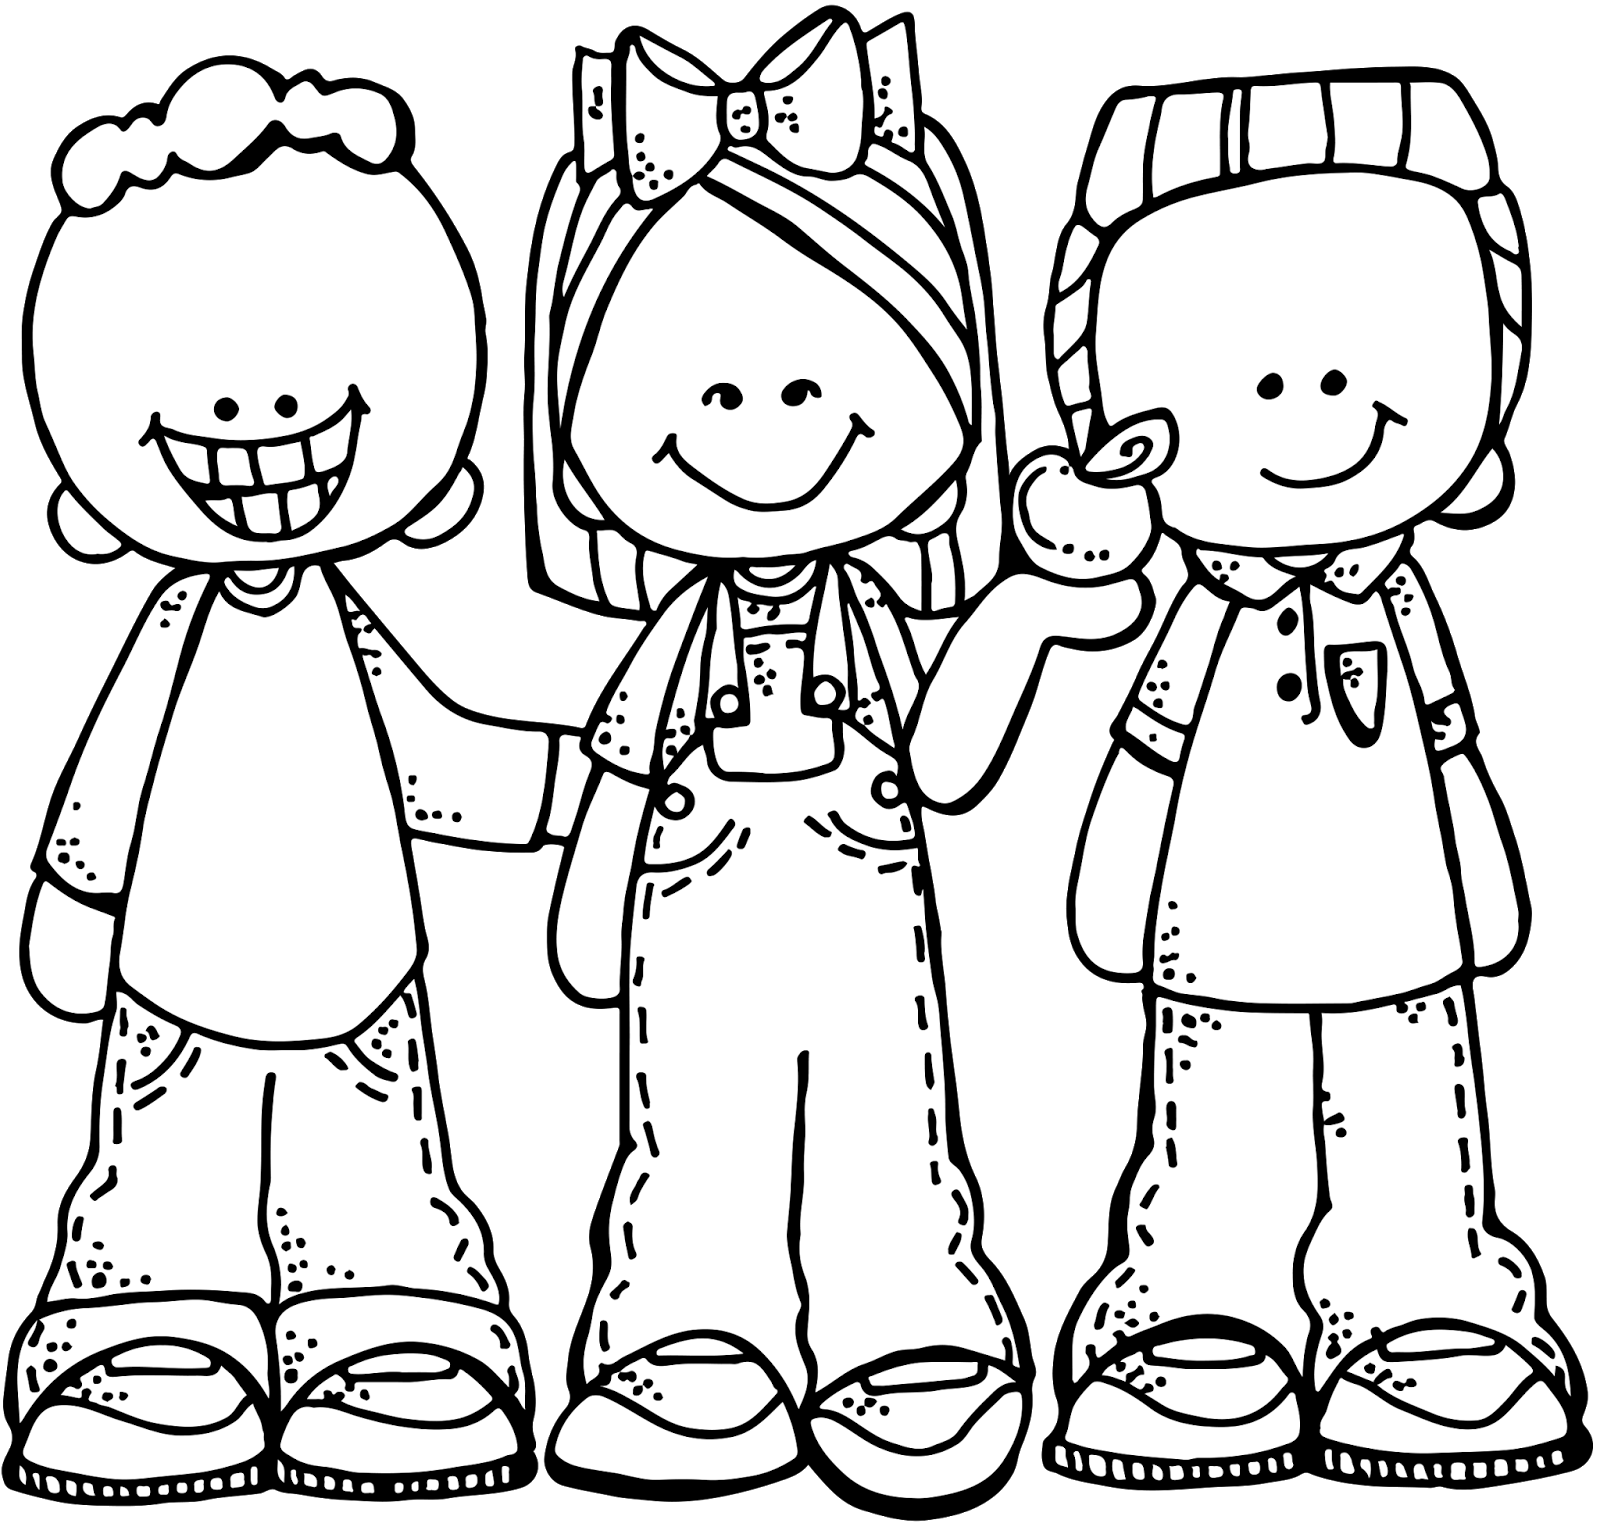 friendship clipart drawing